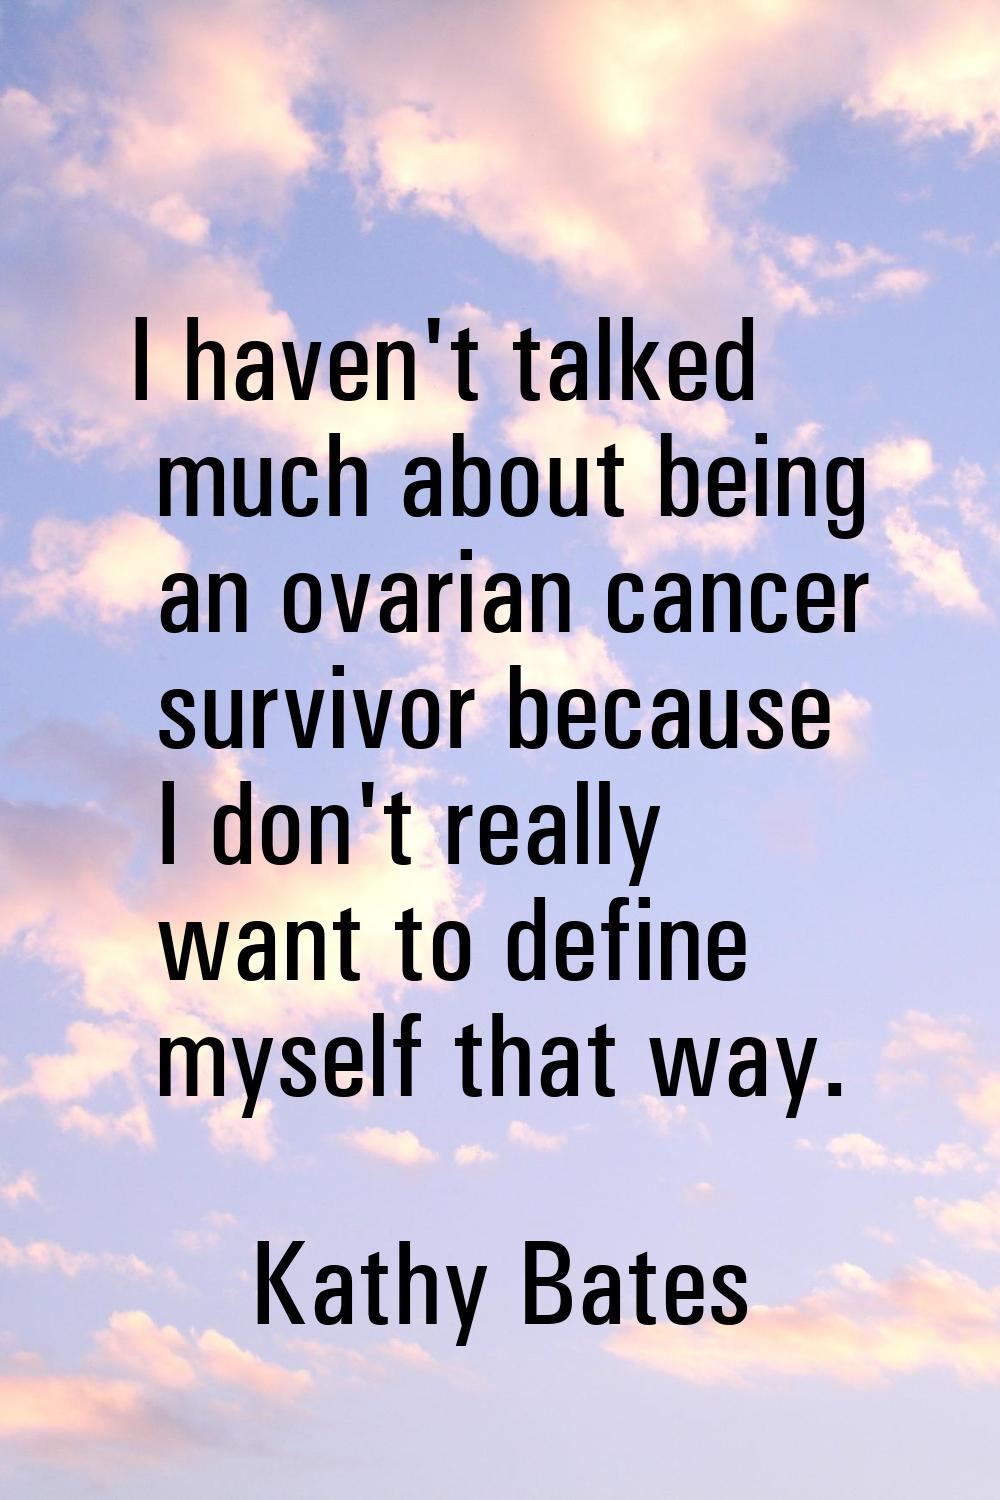 I haven't talked much about being an ovarian cancer survivor because I don't really want to define 